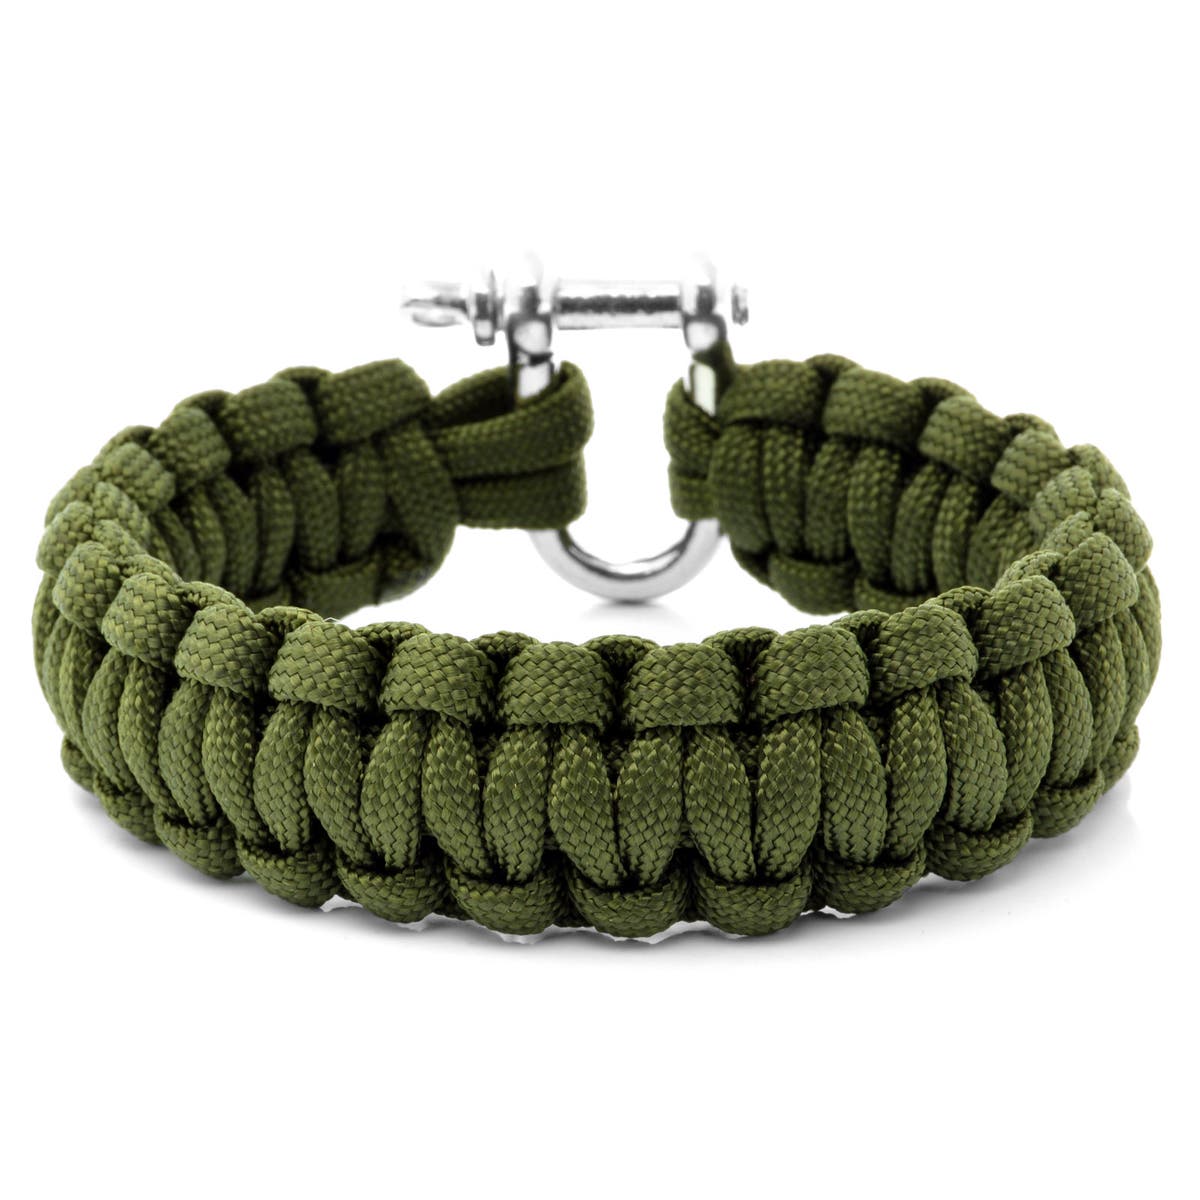 Nutravicity Paracord Emergency 3in1 Survival Bracelet - Green and Black